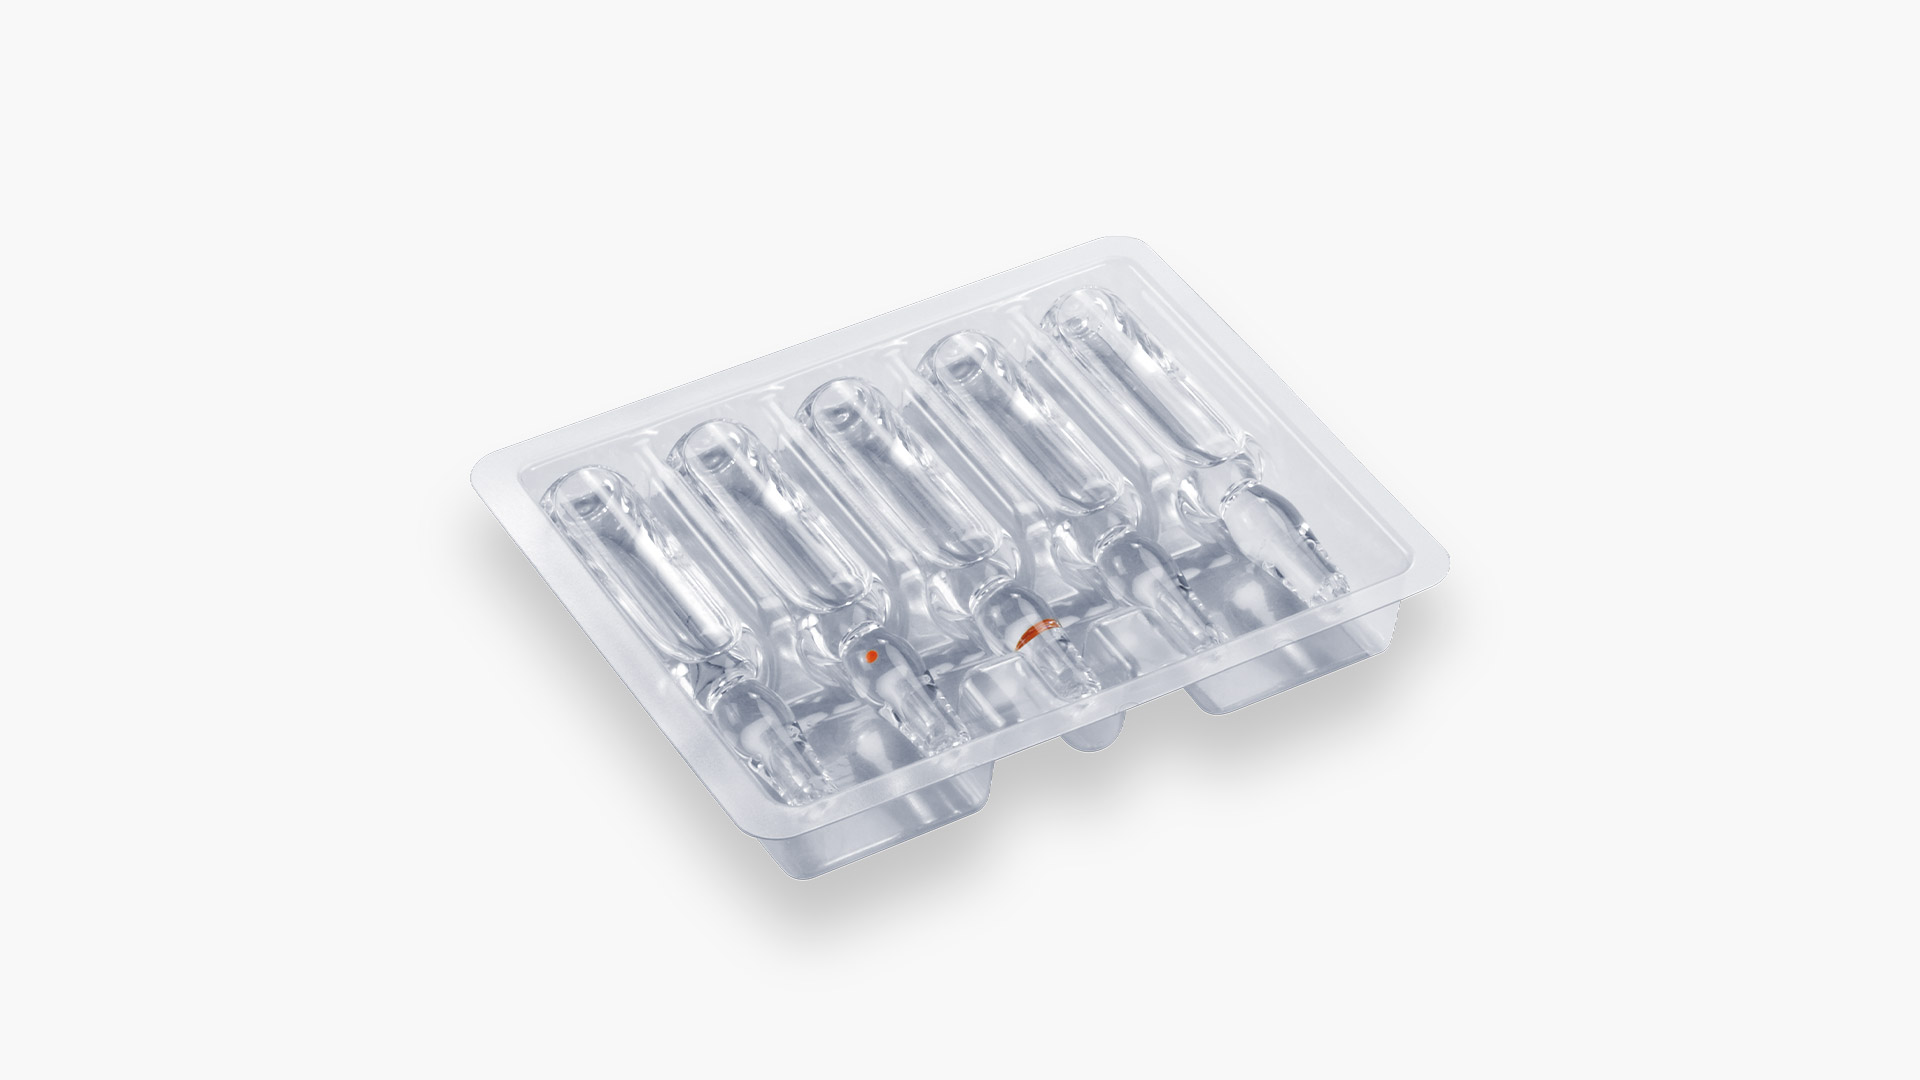 Five glass ampoules inserted into clamp packaging.